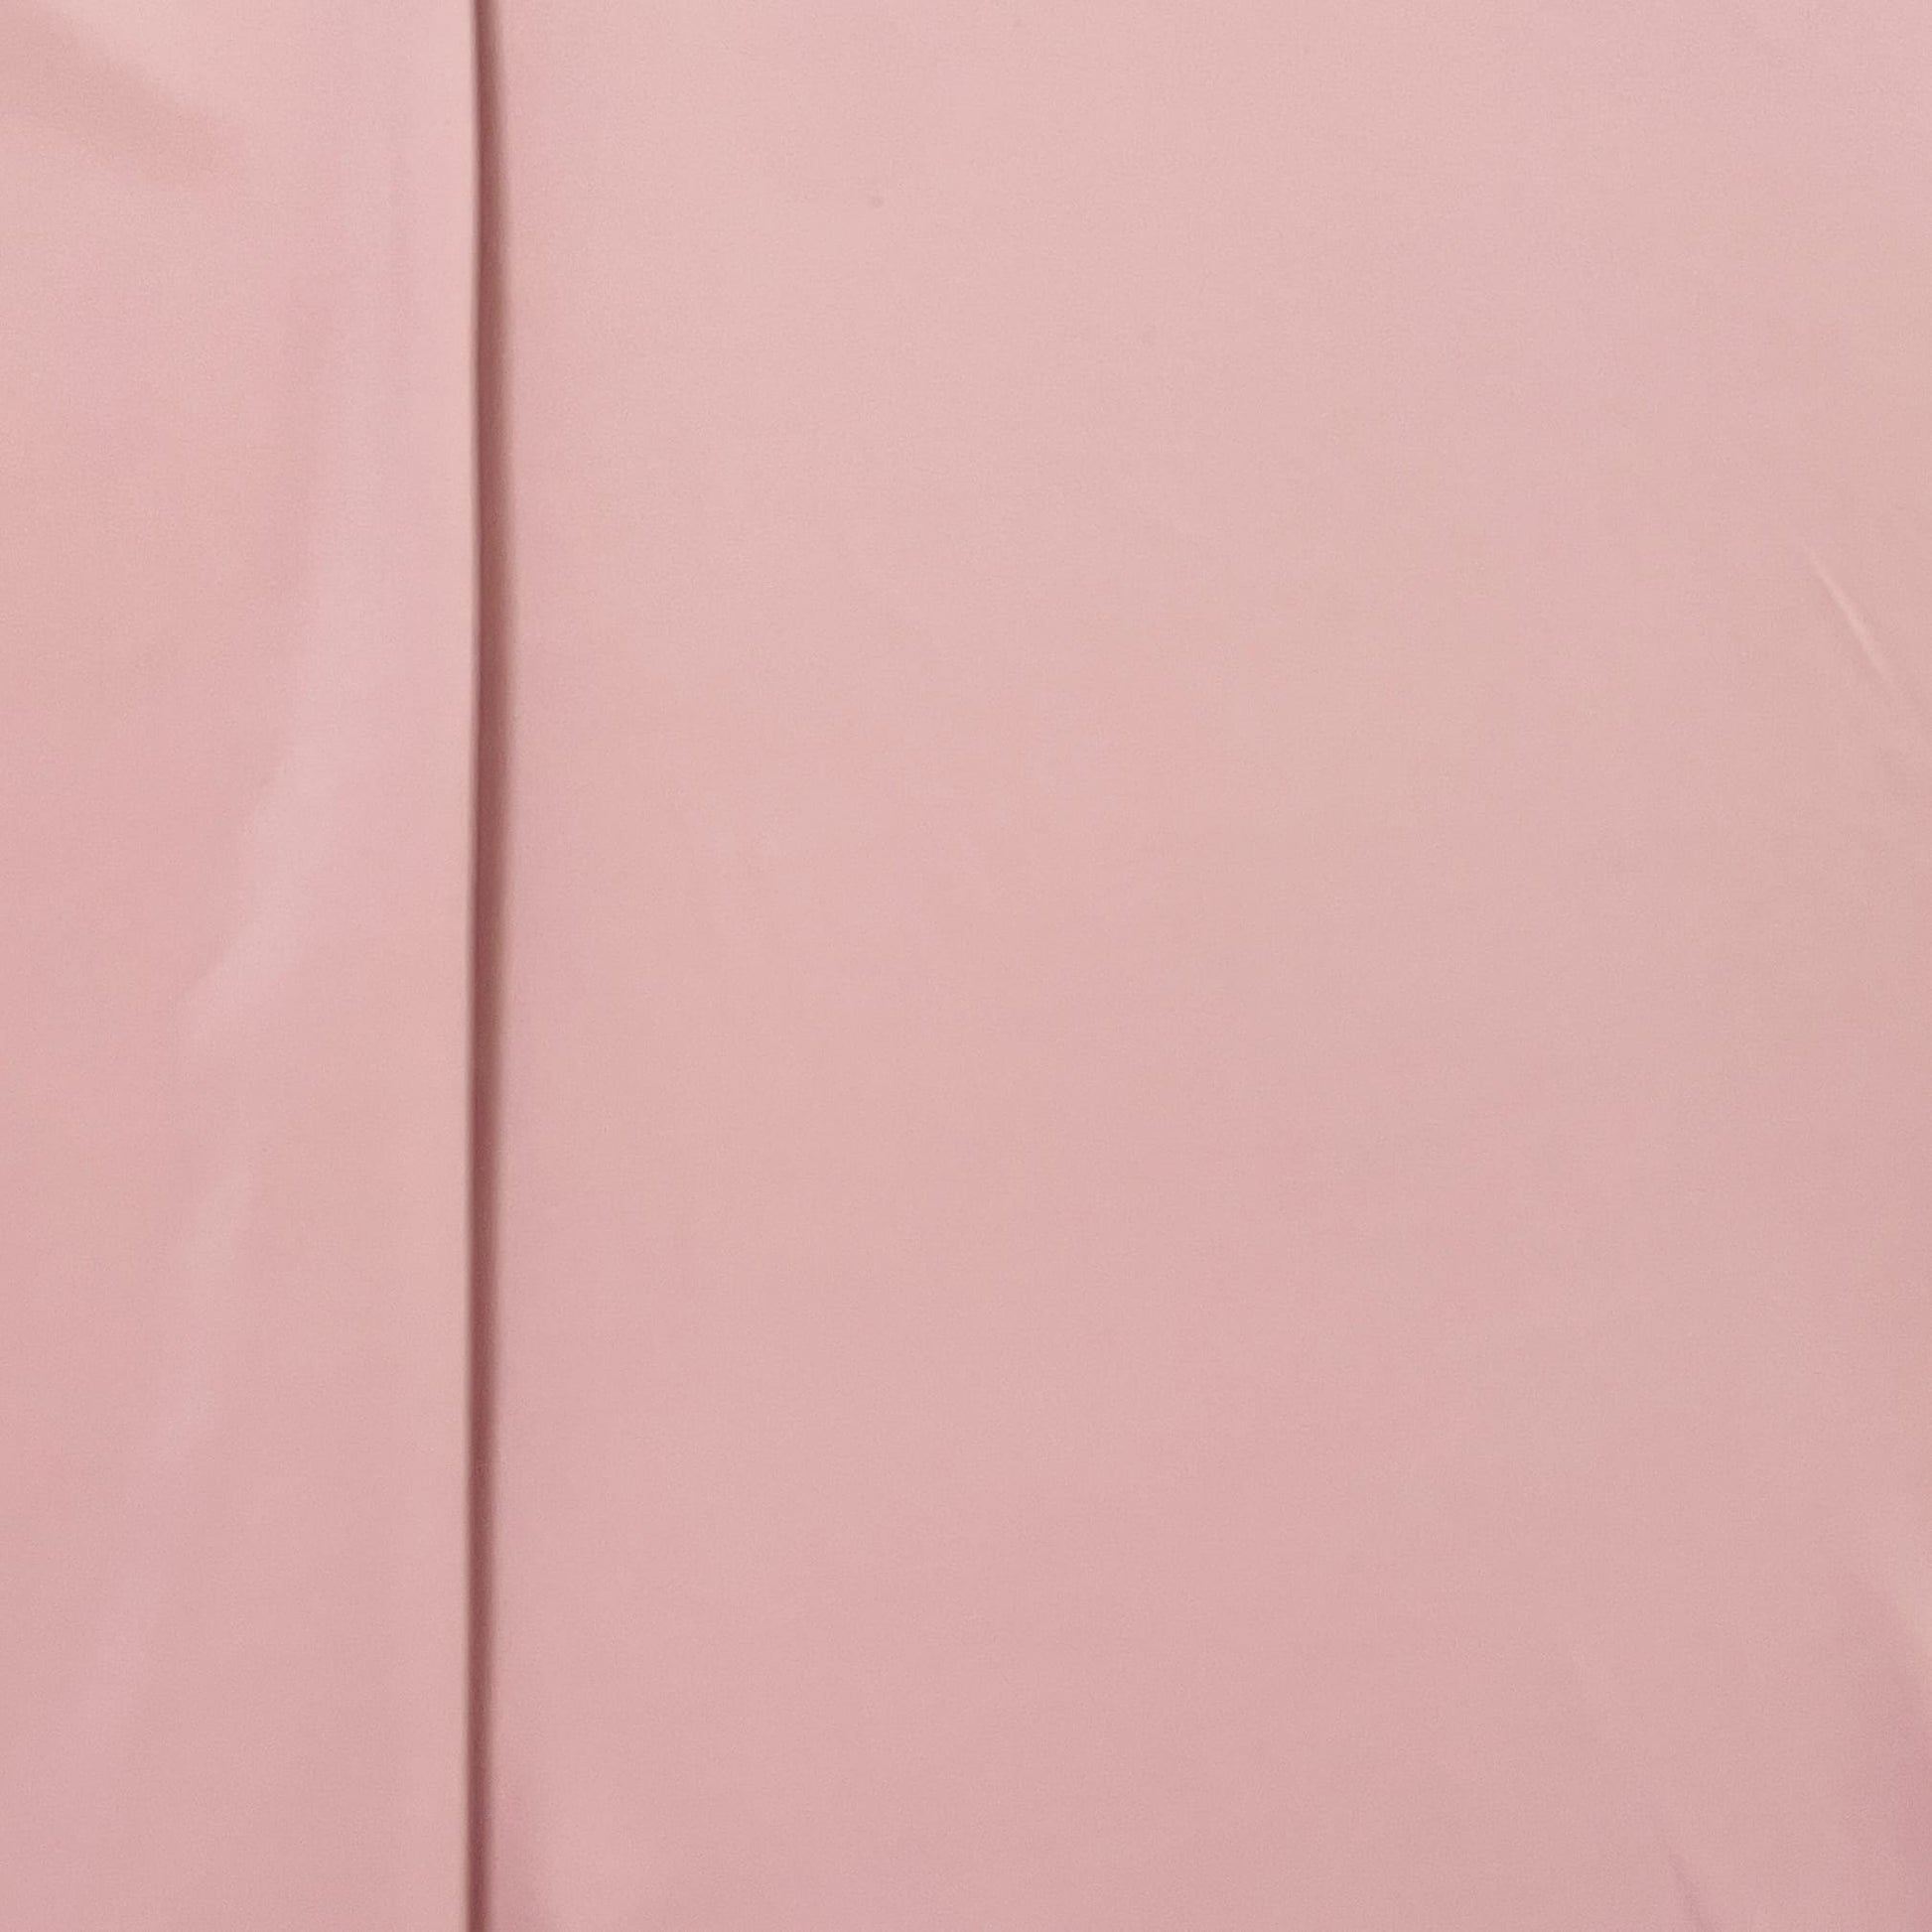 Exclusive Peach Pink Solid Satin Fabric